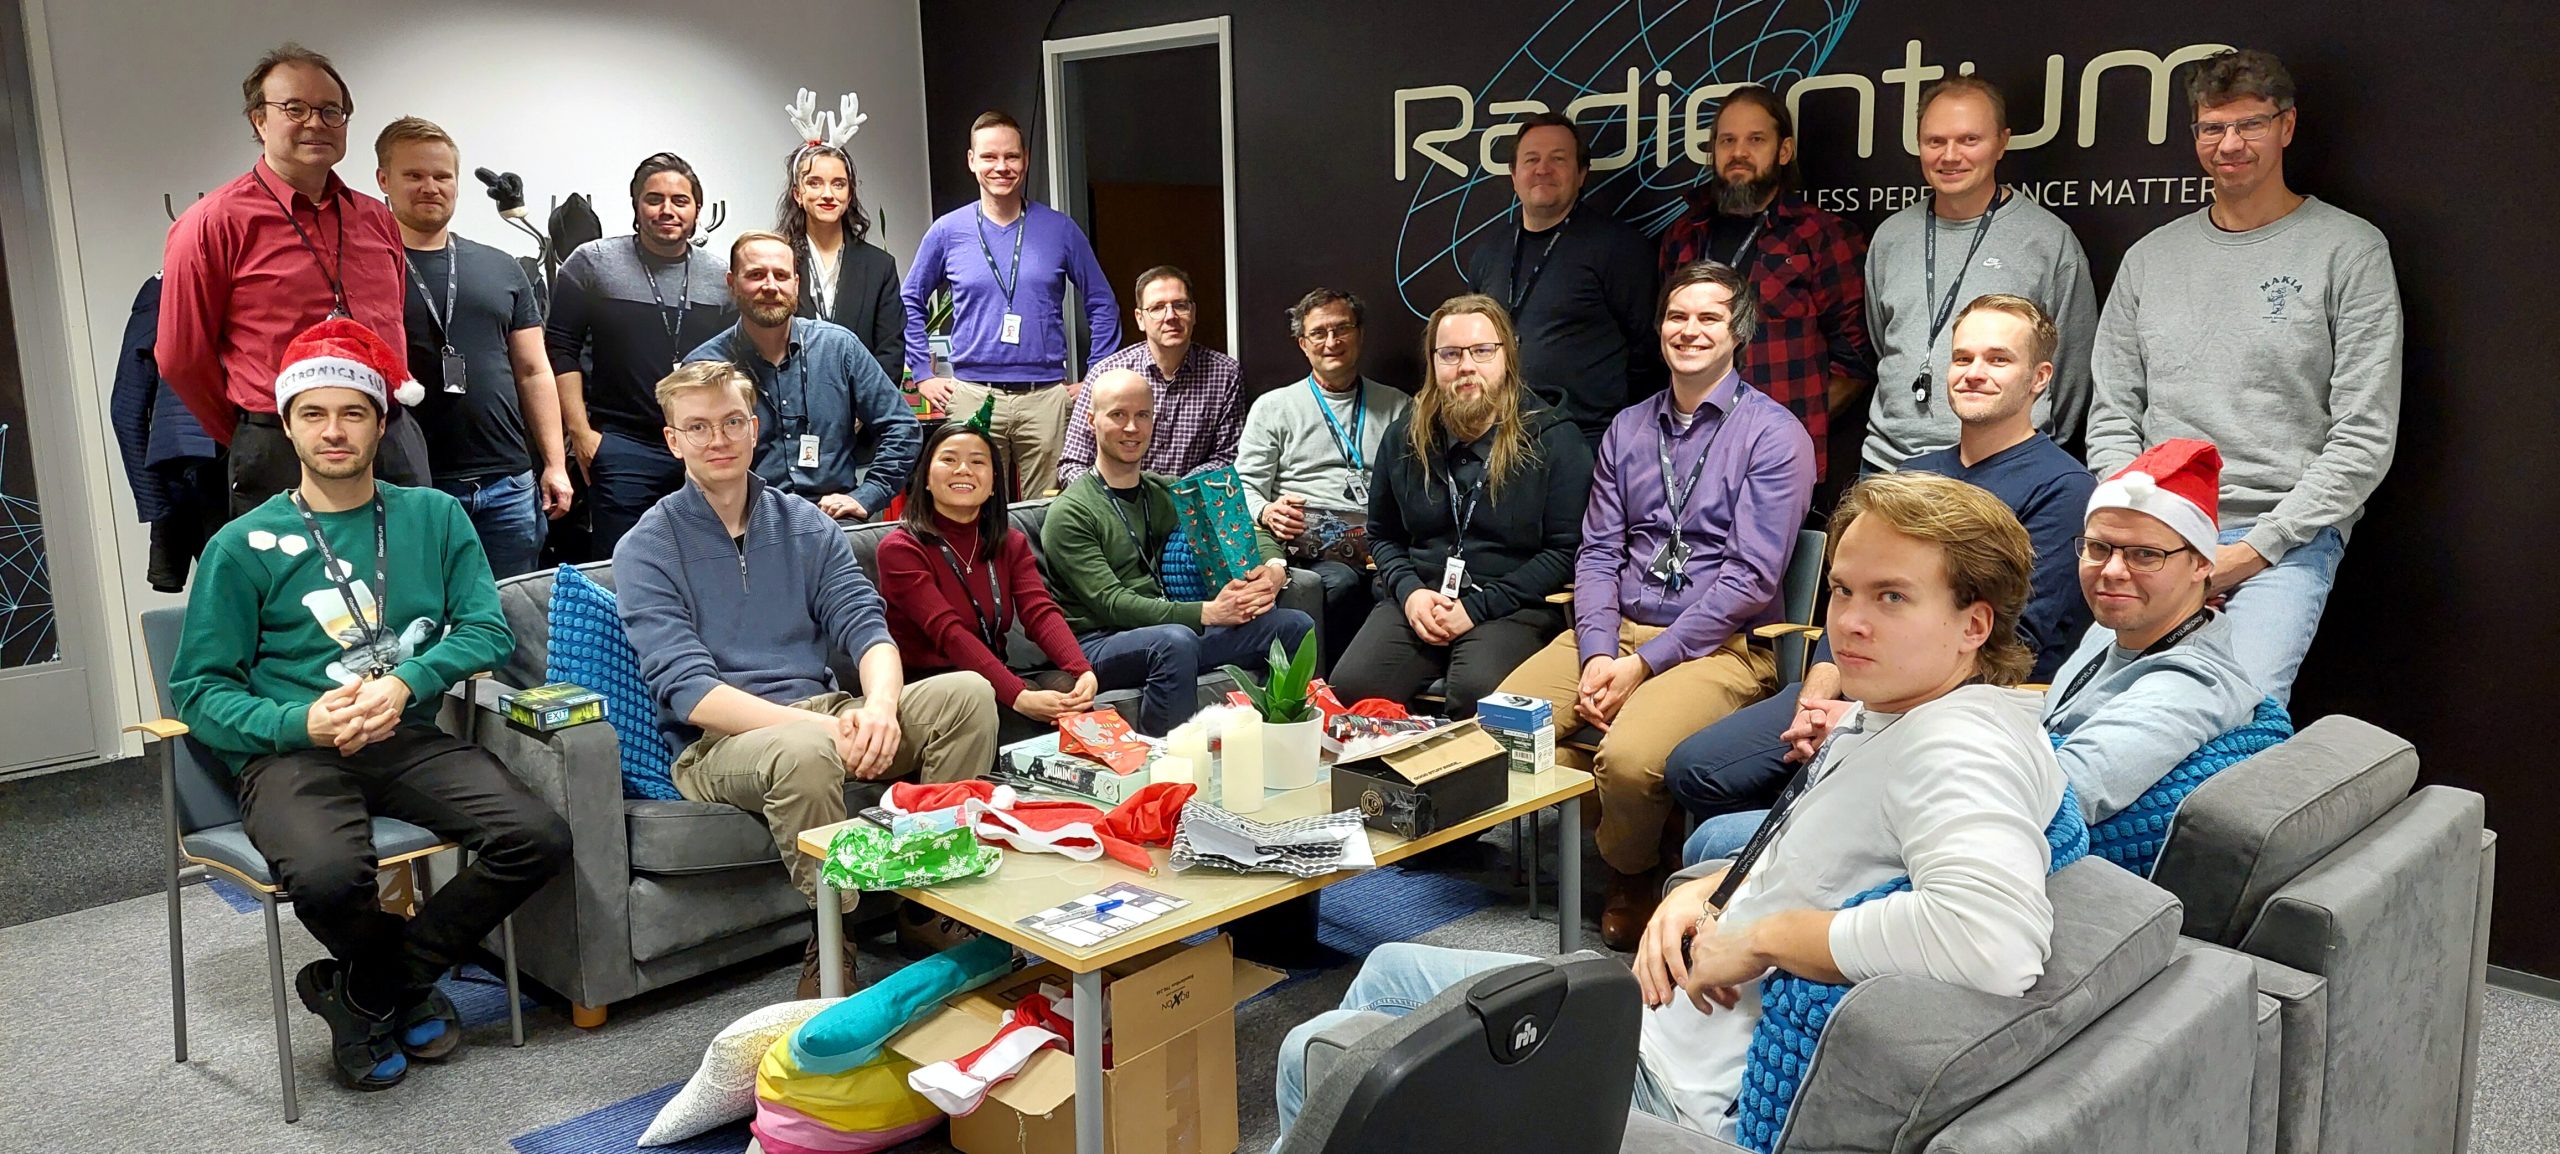 A group photo of the Radientum employees at the Christmas party